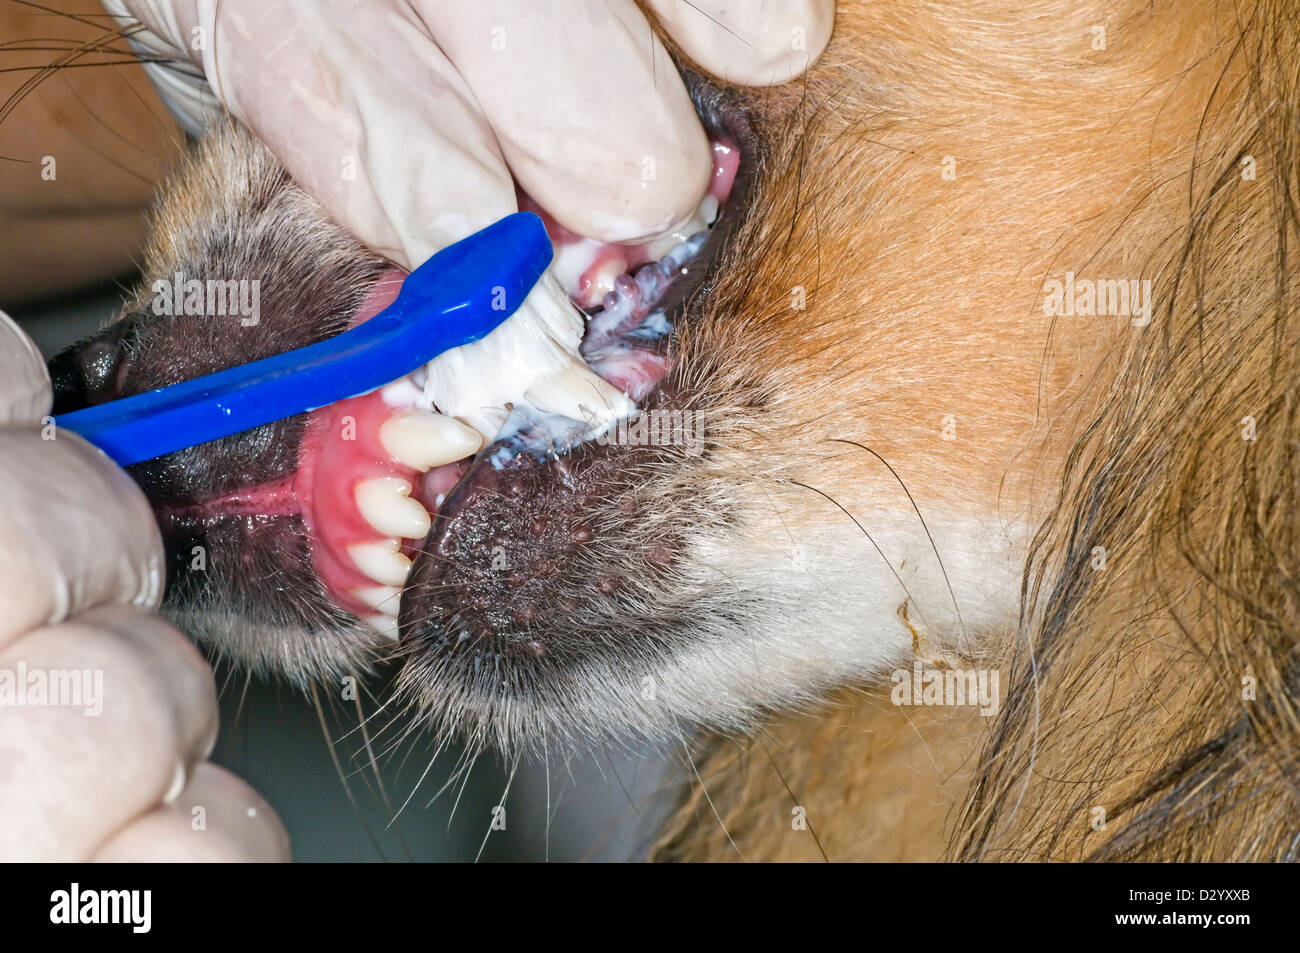 cleaning dog teeth with a tooth-brush Stock Photo